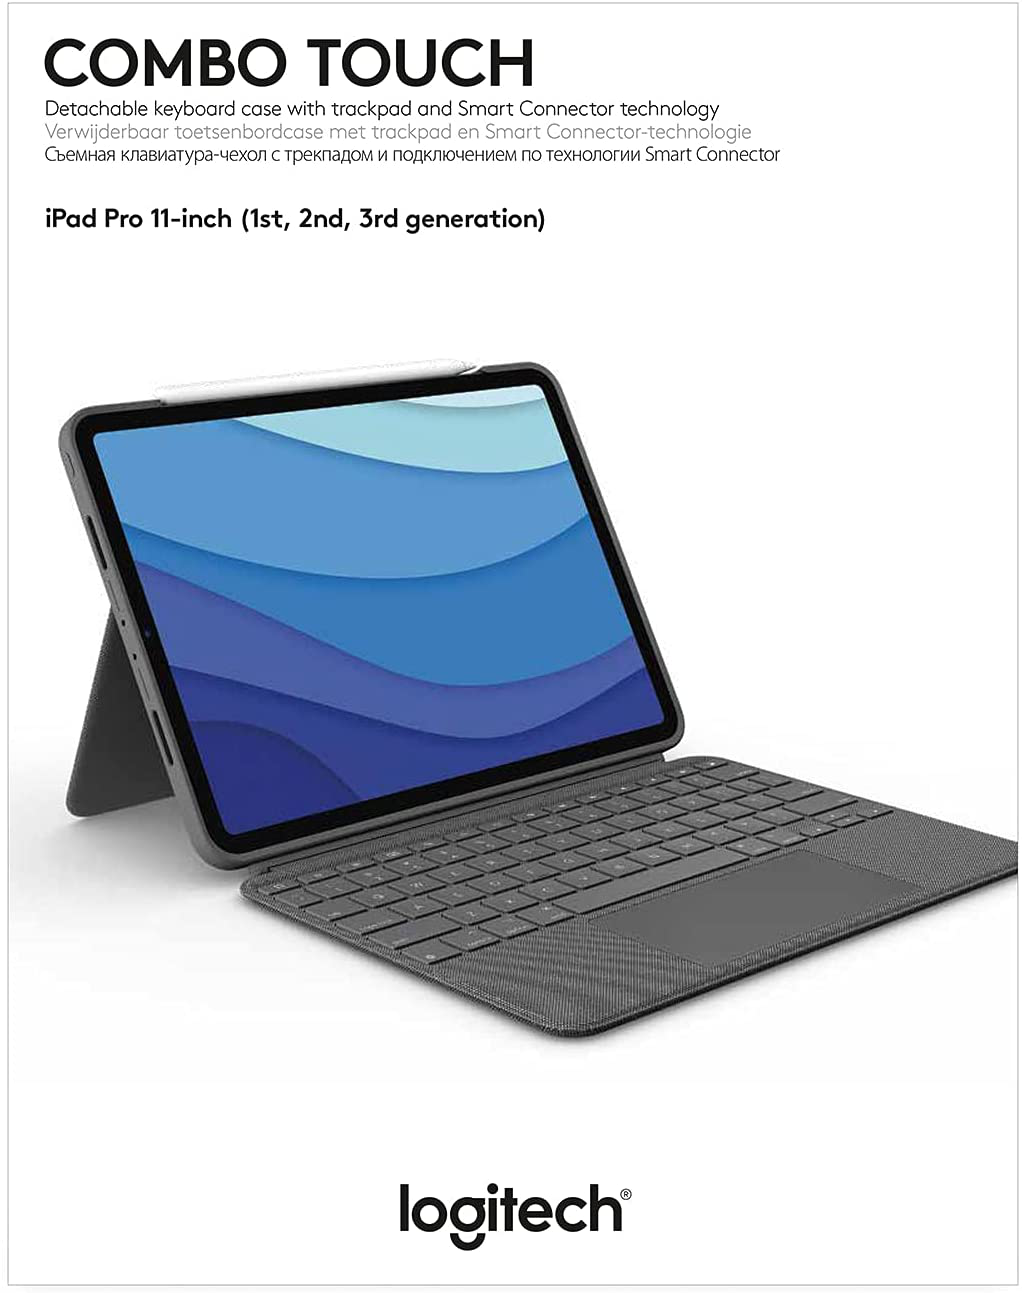 Logitech Combo Touch Ipad Pro 11-Inch (1St, 2Nd, 3Rd Gen - 2018, 2020, 2021) Keyboard Case - Detachable Backlit Keyboard, Click-Anywhere Trackpad, Smart Connector - Oxford Gray; USA Layout